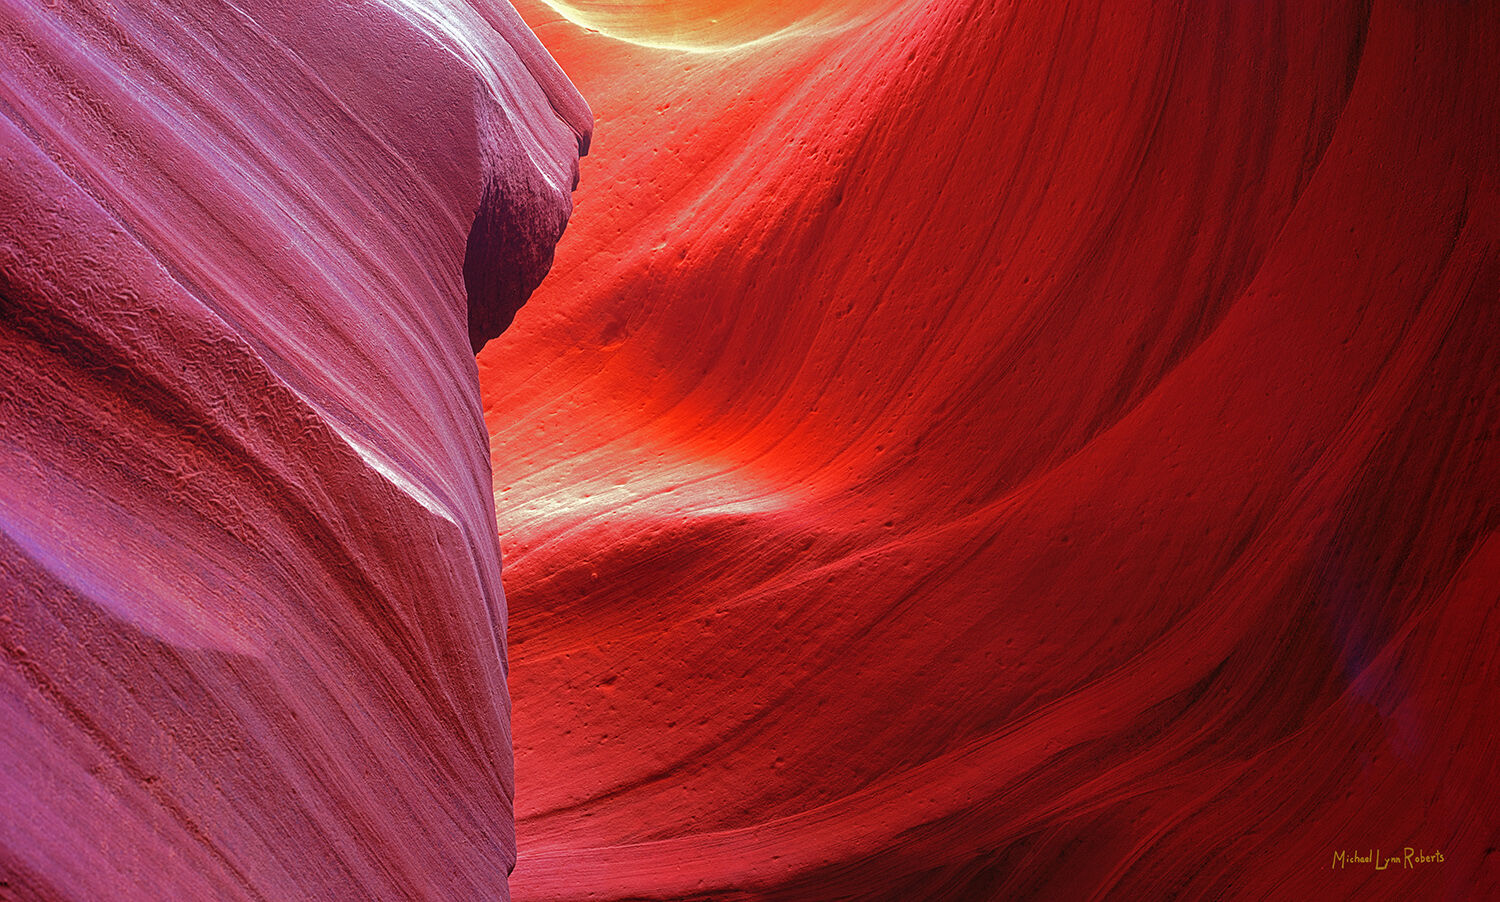 The is one of the most abstract of my Lower Antelope Canyon photographs. I was specifically looking for unusual abstract compositions...